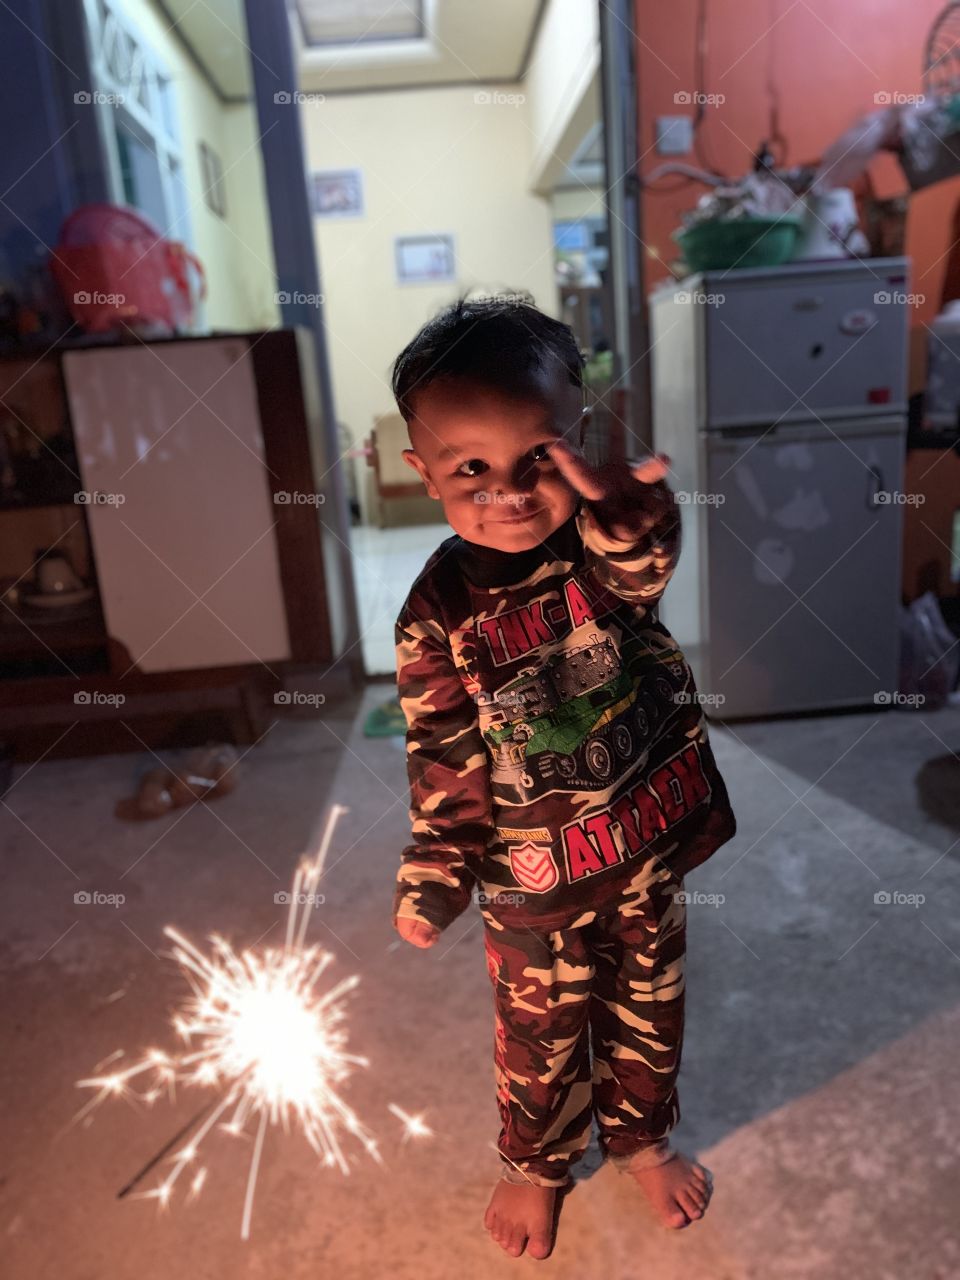 He look so hapy with the lil fire work